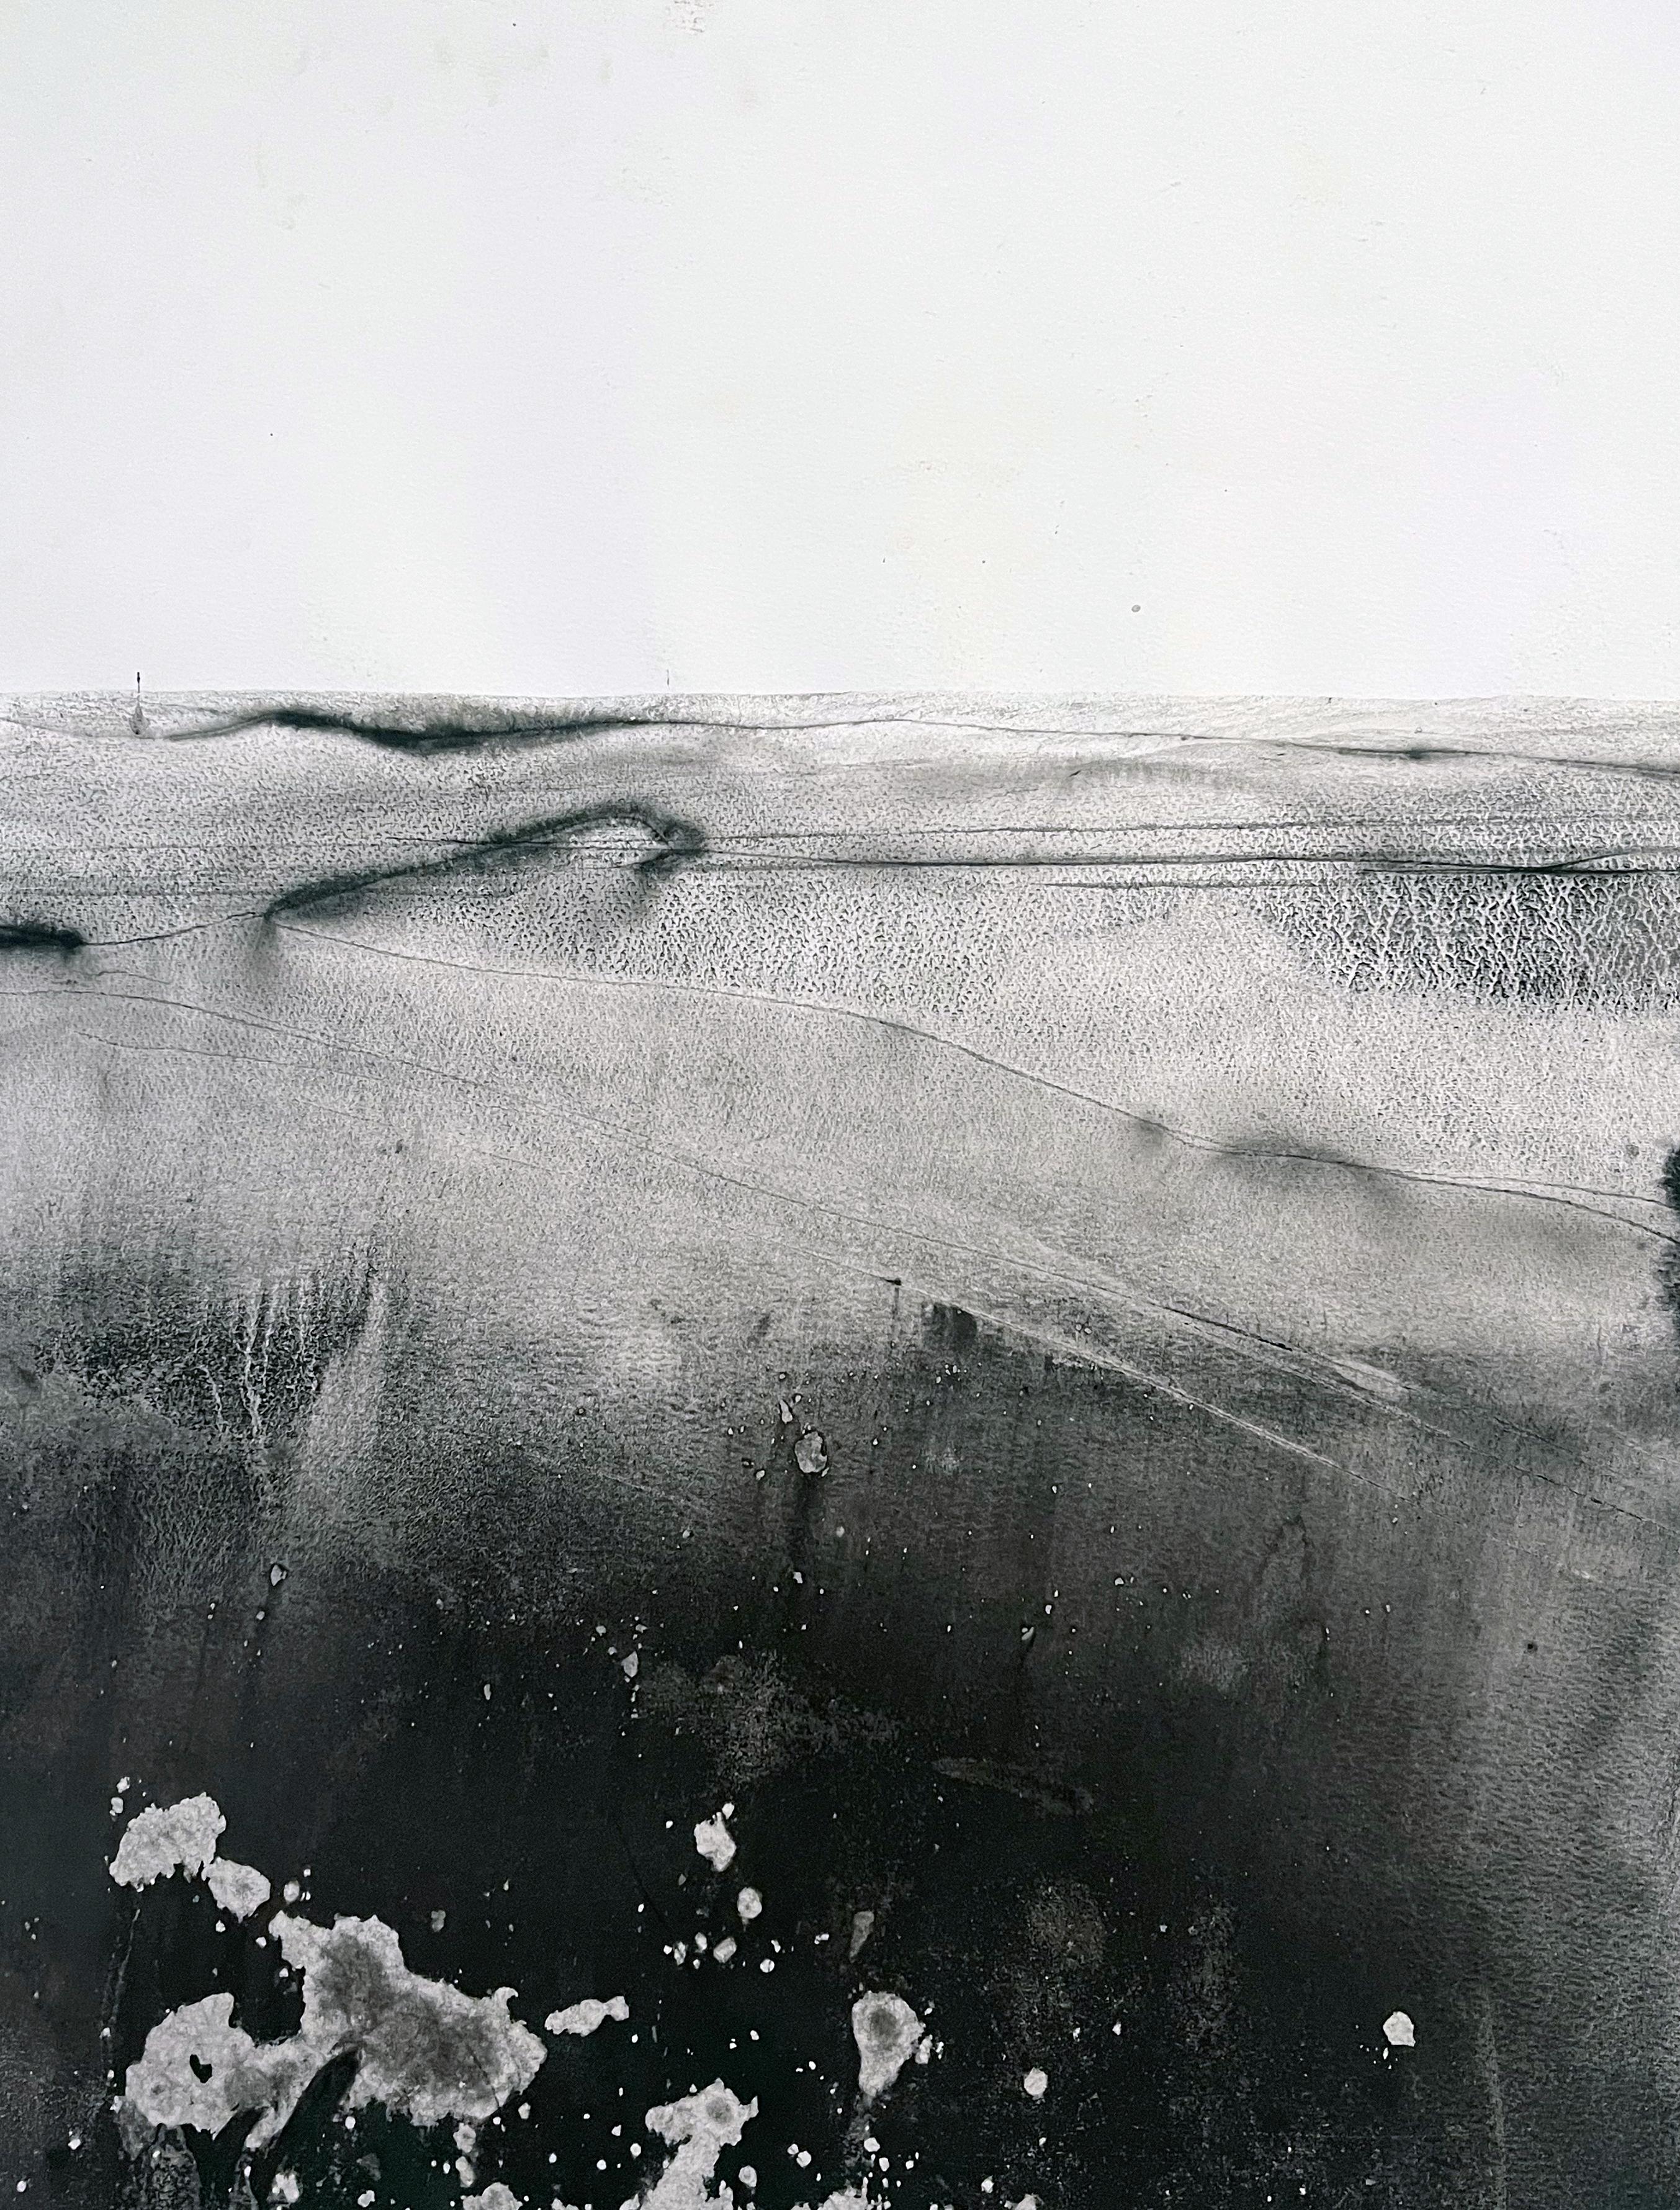 Landscape BW
Mineral Oxide on Paper ( Canson Paper 300gr)
55x75 cm
2022
one of a kind
the painting can be shipped with the frame ready to hang, 
or on a rigid support with passpartout.
framing options can be agreed with the buyer
shipped with